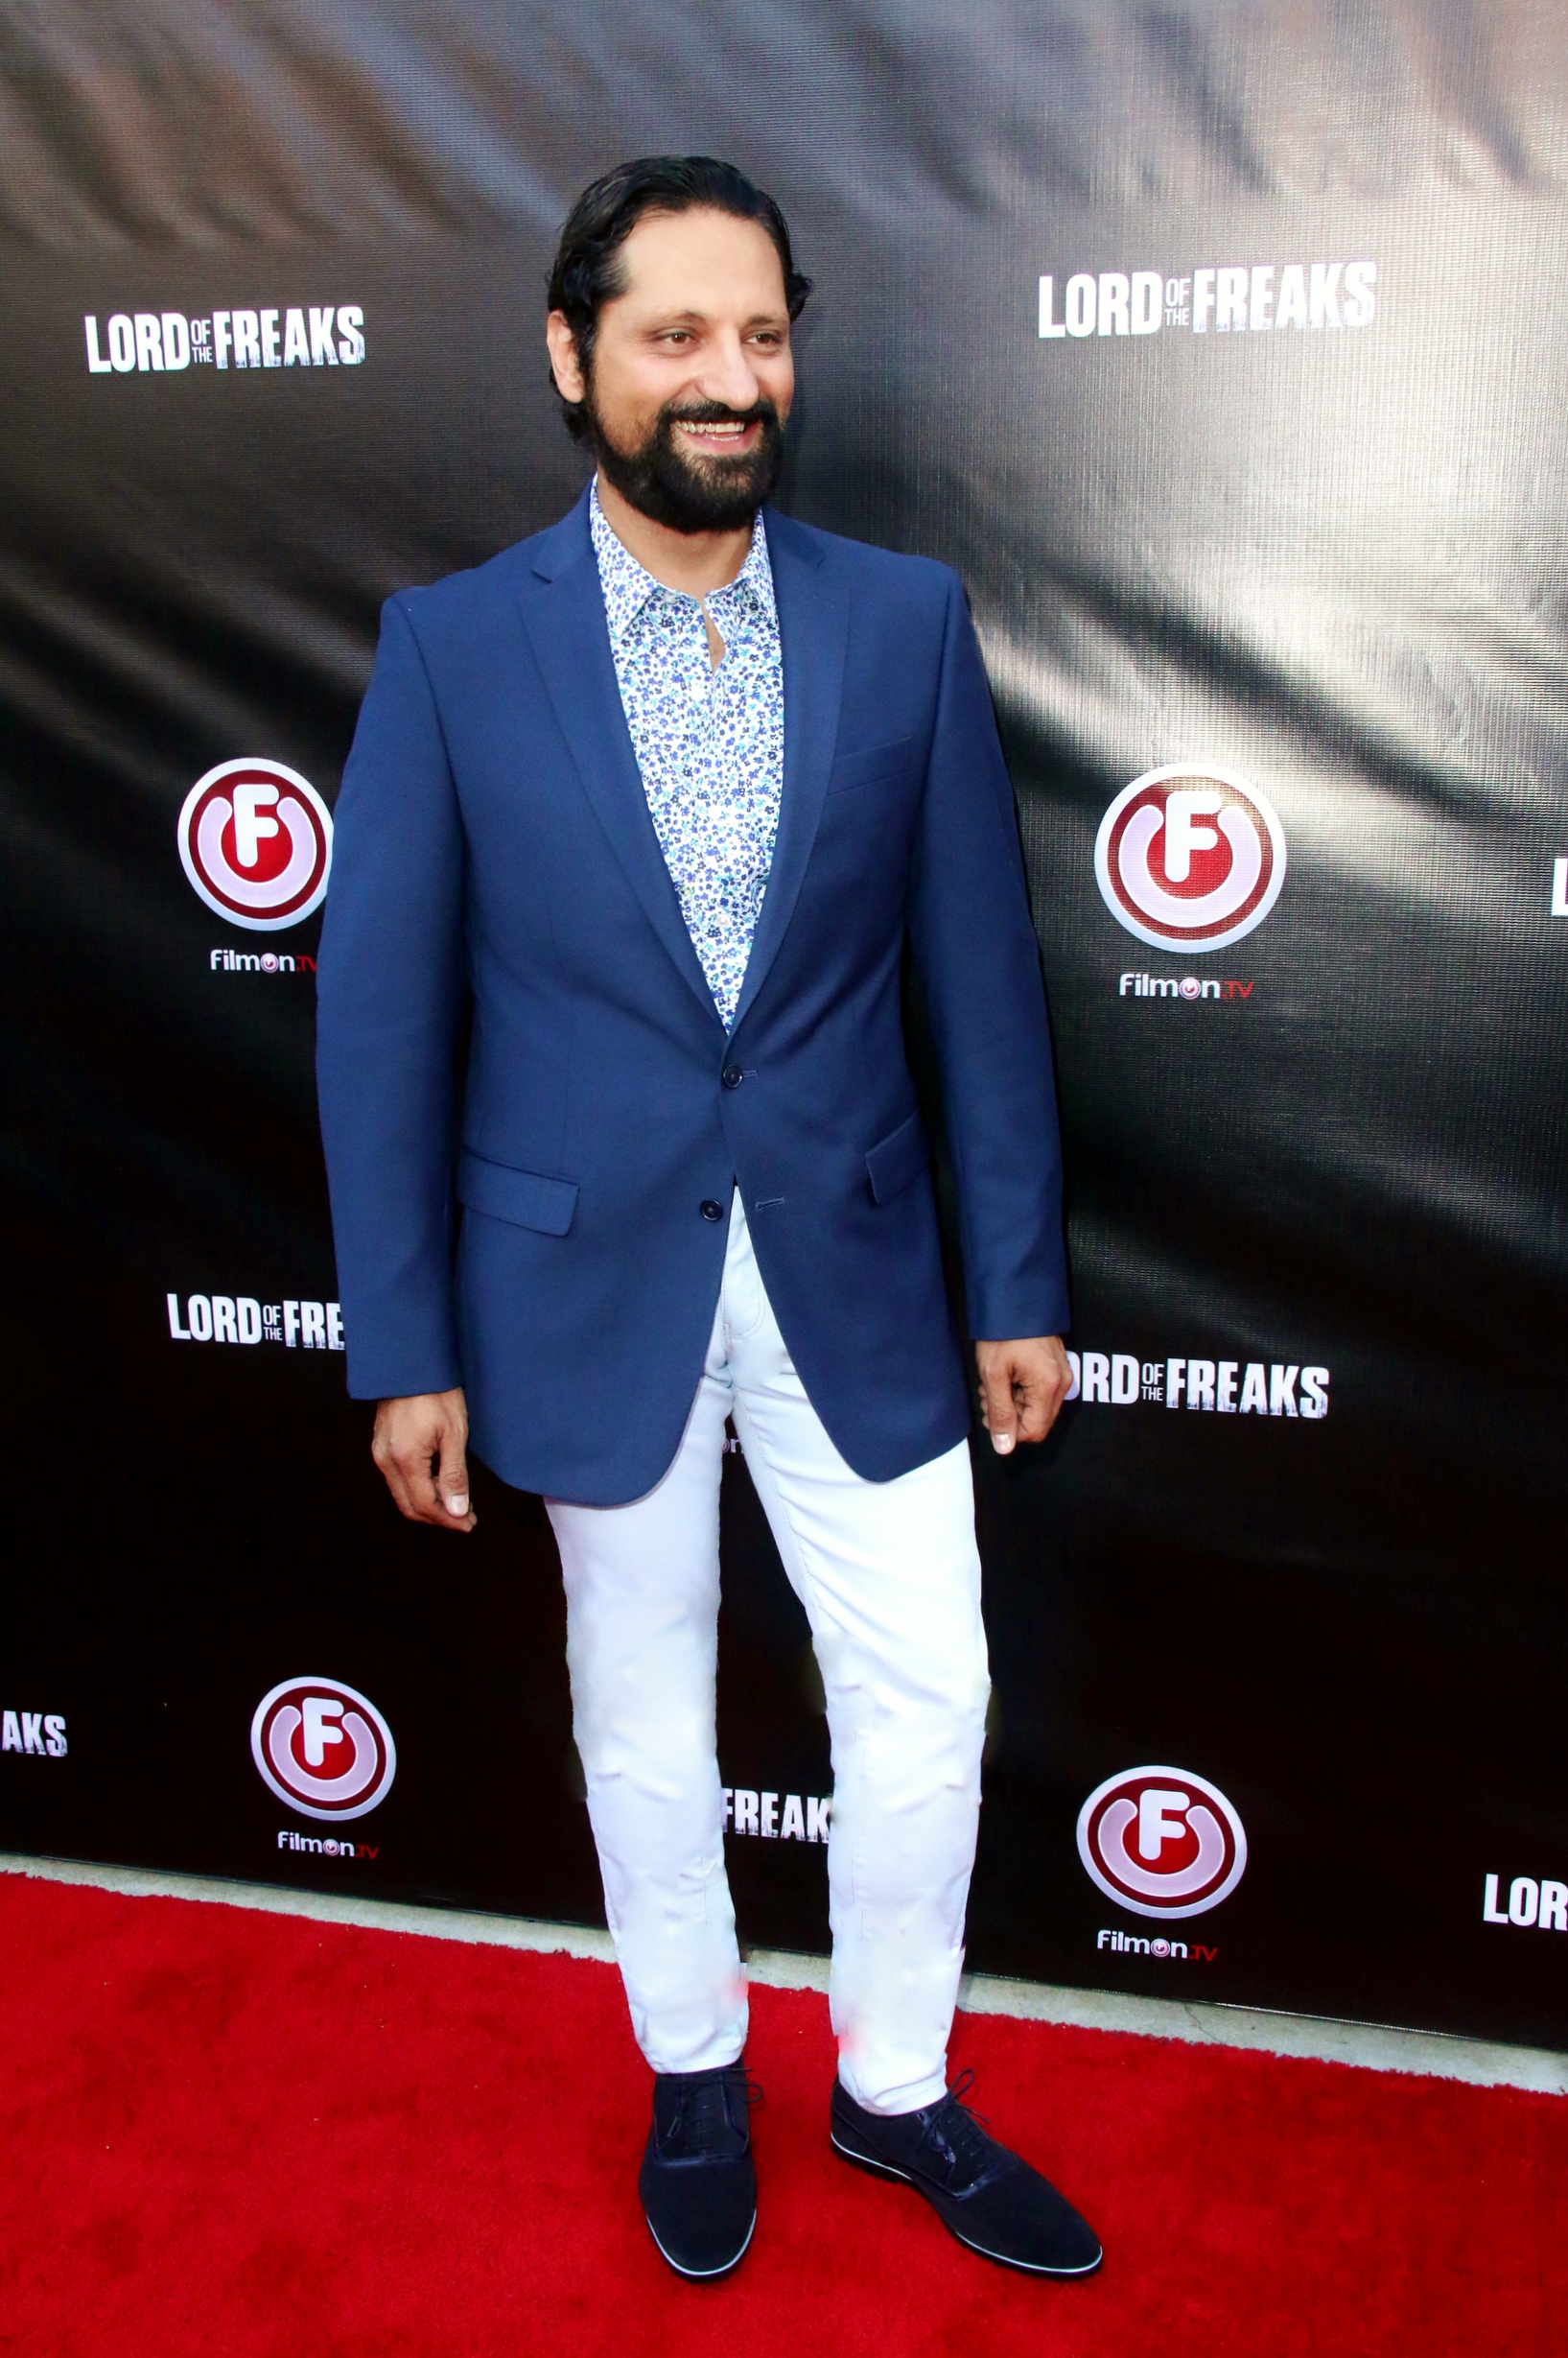 Danny Boushebel attends the 'Lord Of The Freaks' Red Carpet Premiere at the Egyptian Theater in Hollywood on 6/29/2015.